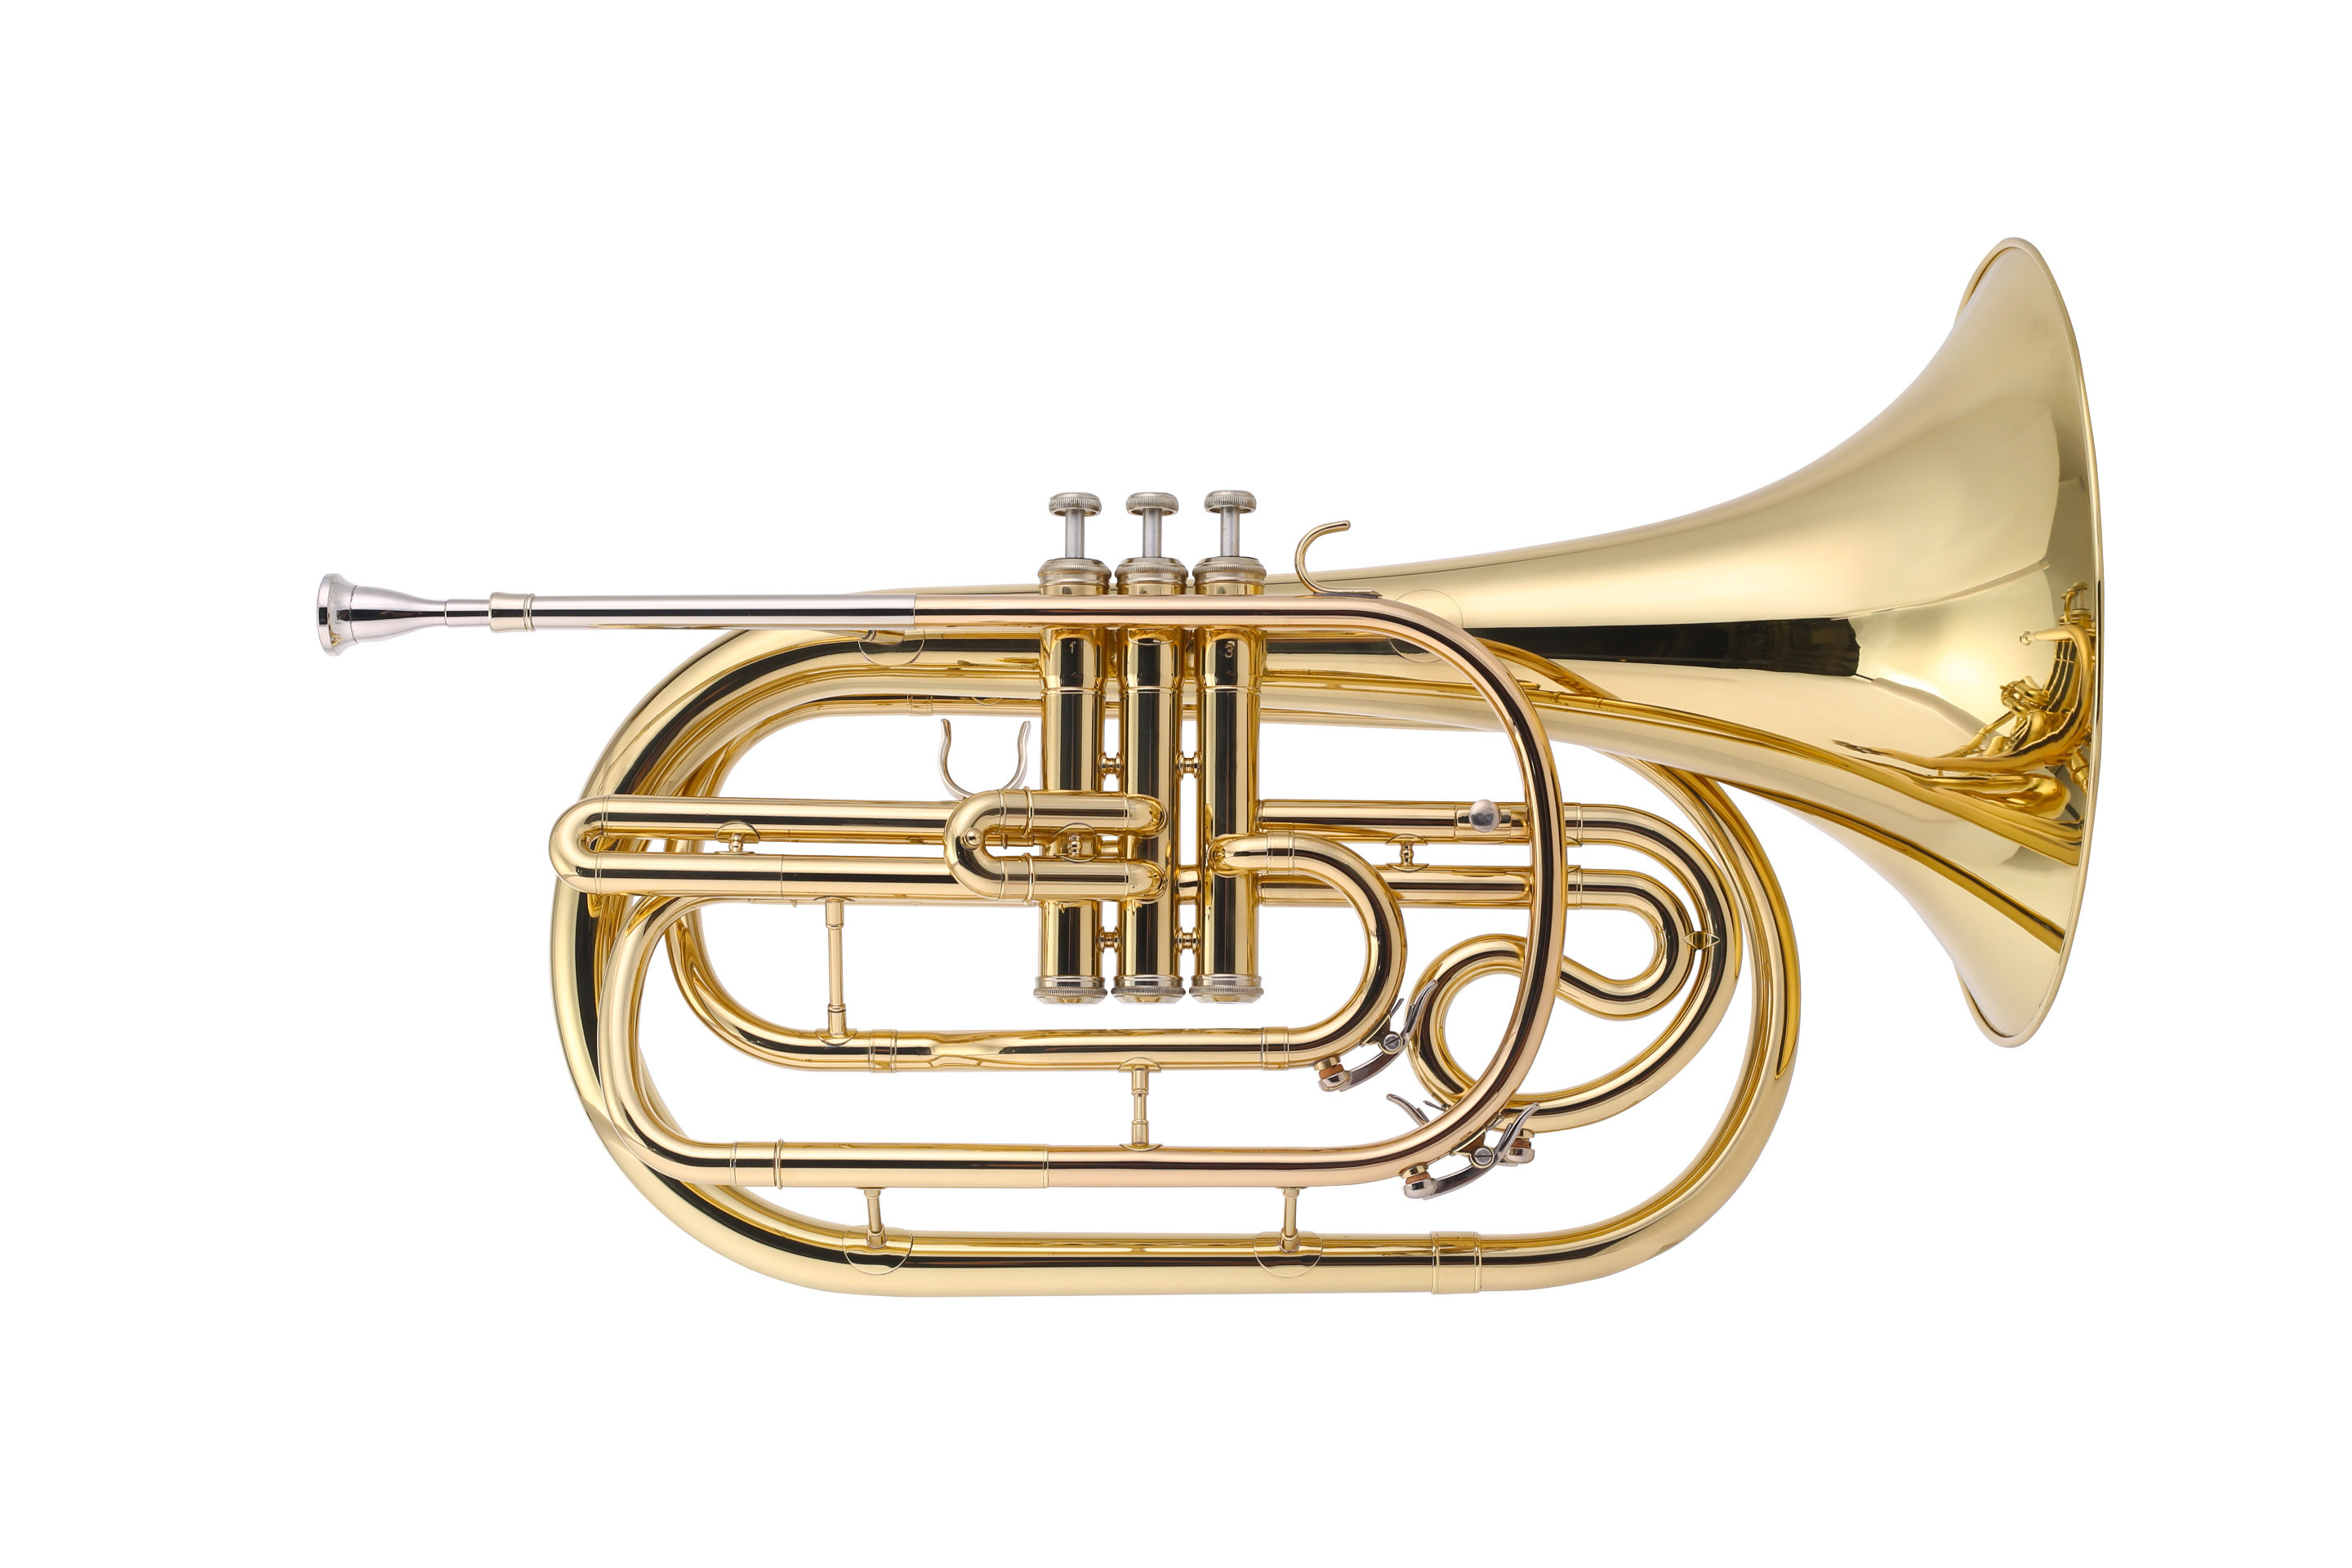 Mellophone: The Middle-Voiced Brass Instrument, Bell, Three Valves And A Fingering. 2880x1920 HD Wallpaper.